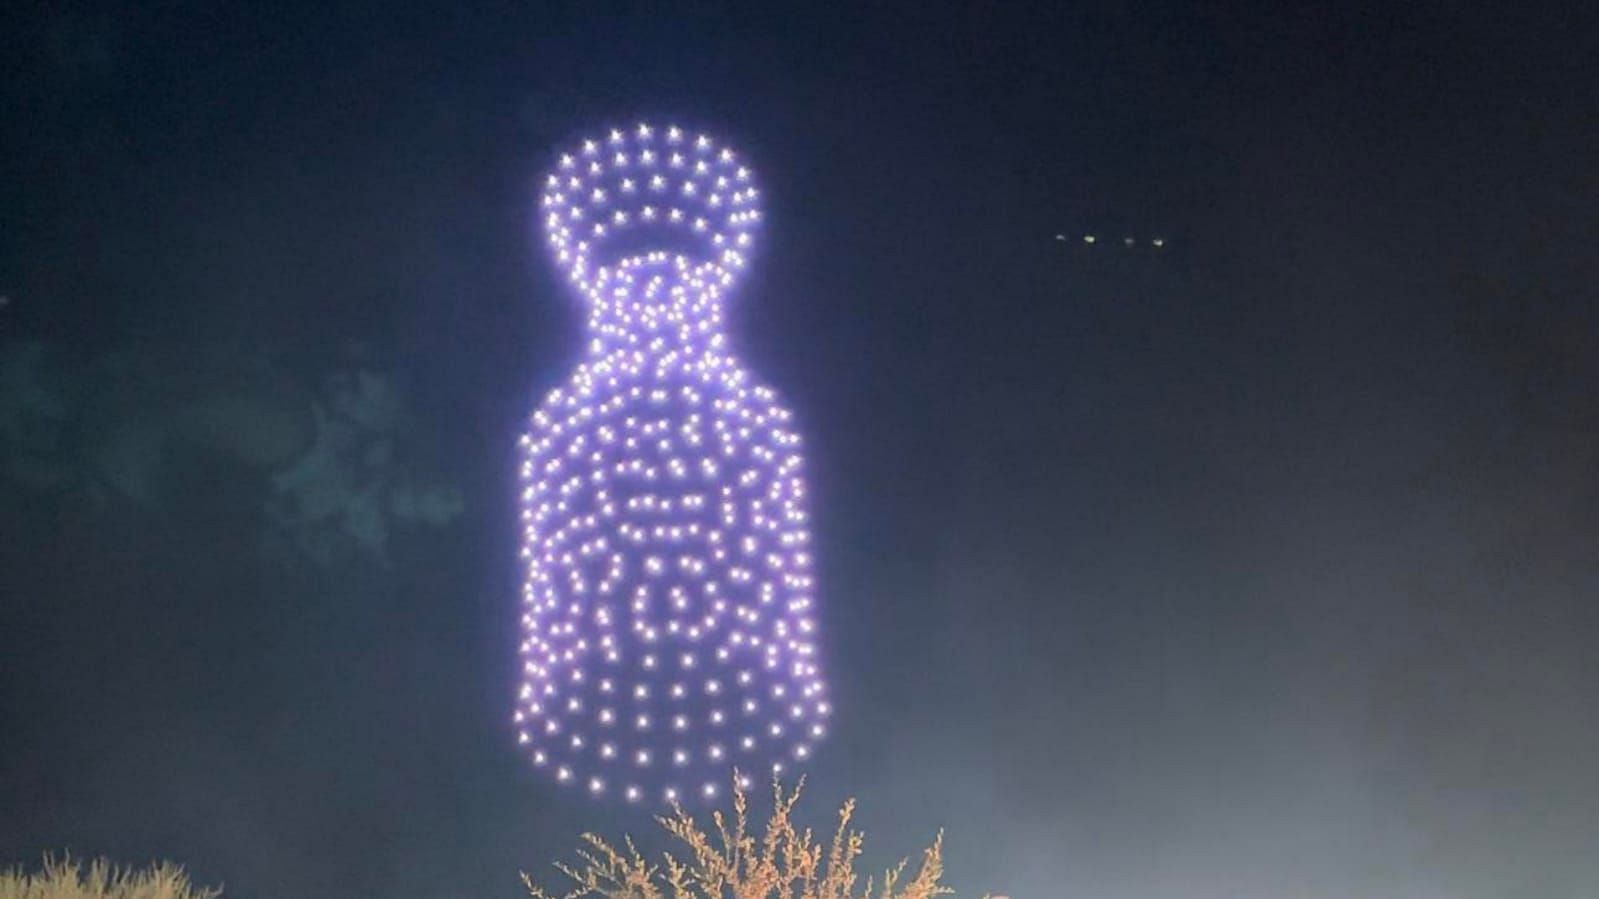 Stanley Cup made of drones lit up the Vegas night sky at the Golden Knights trophy parade